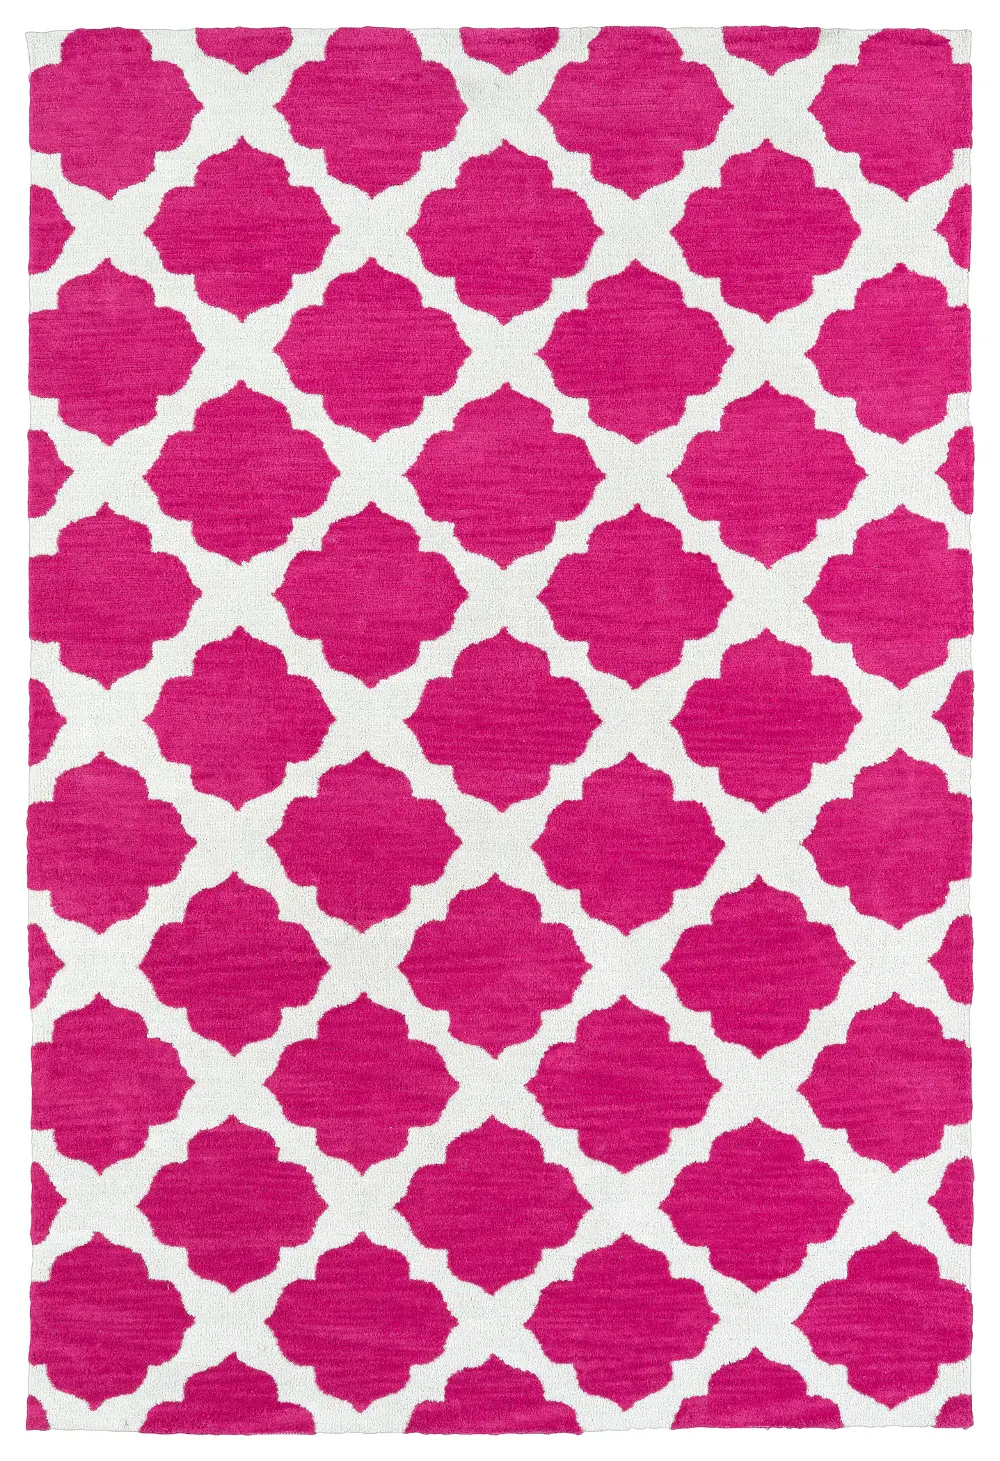 5 x 7 Medium Pink and Ivory Area Rug - Lily & Liam-1